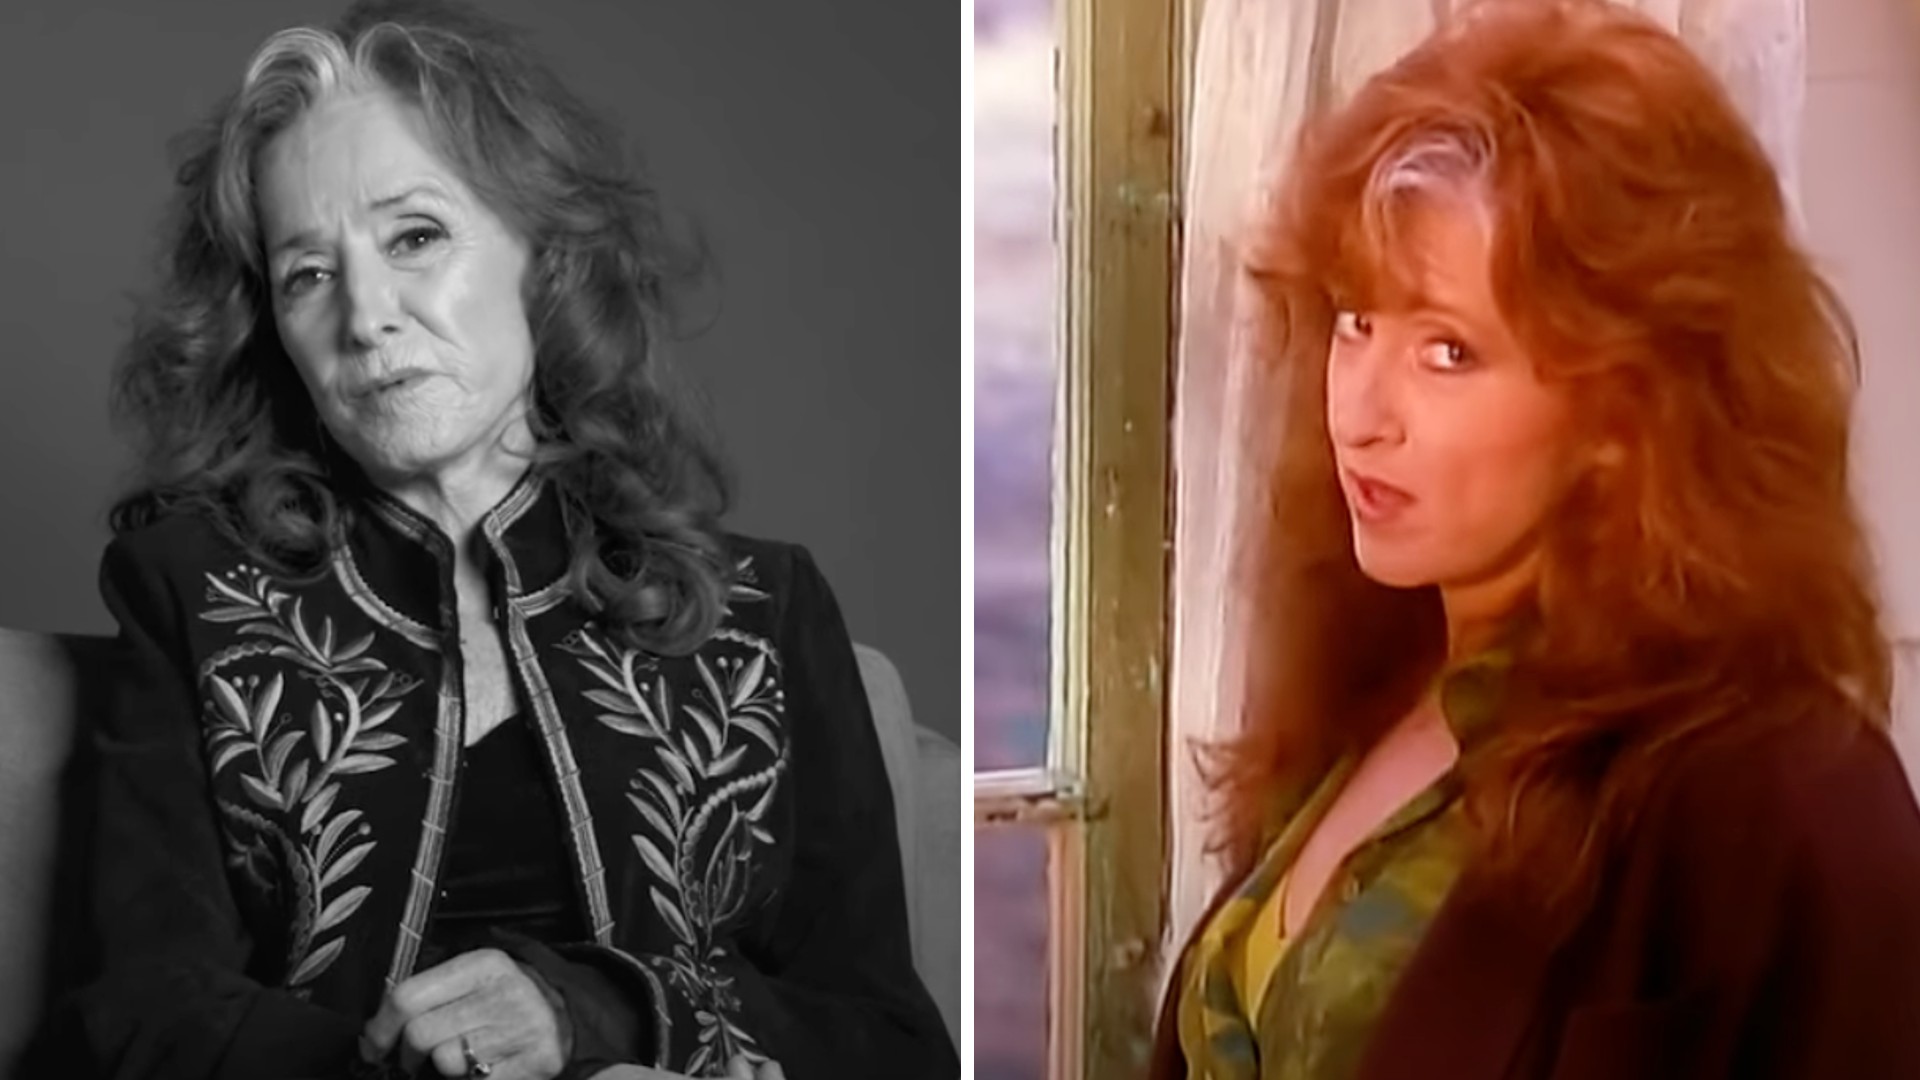 A grayscale image of an older woman with long, wavy hair wearing an embroidered jacket is on the left. On the right, a color image shows a younger woman with voluminous red hair standing by a window, dressed in a dark jacket over a patterned blouse.